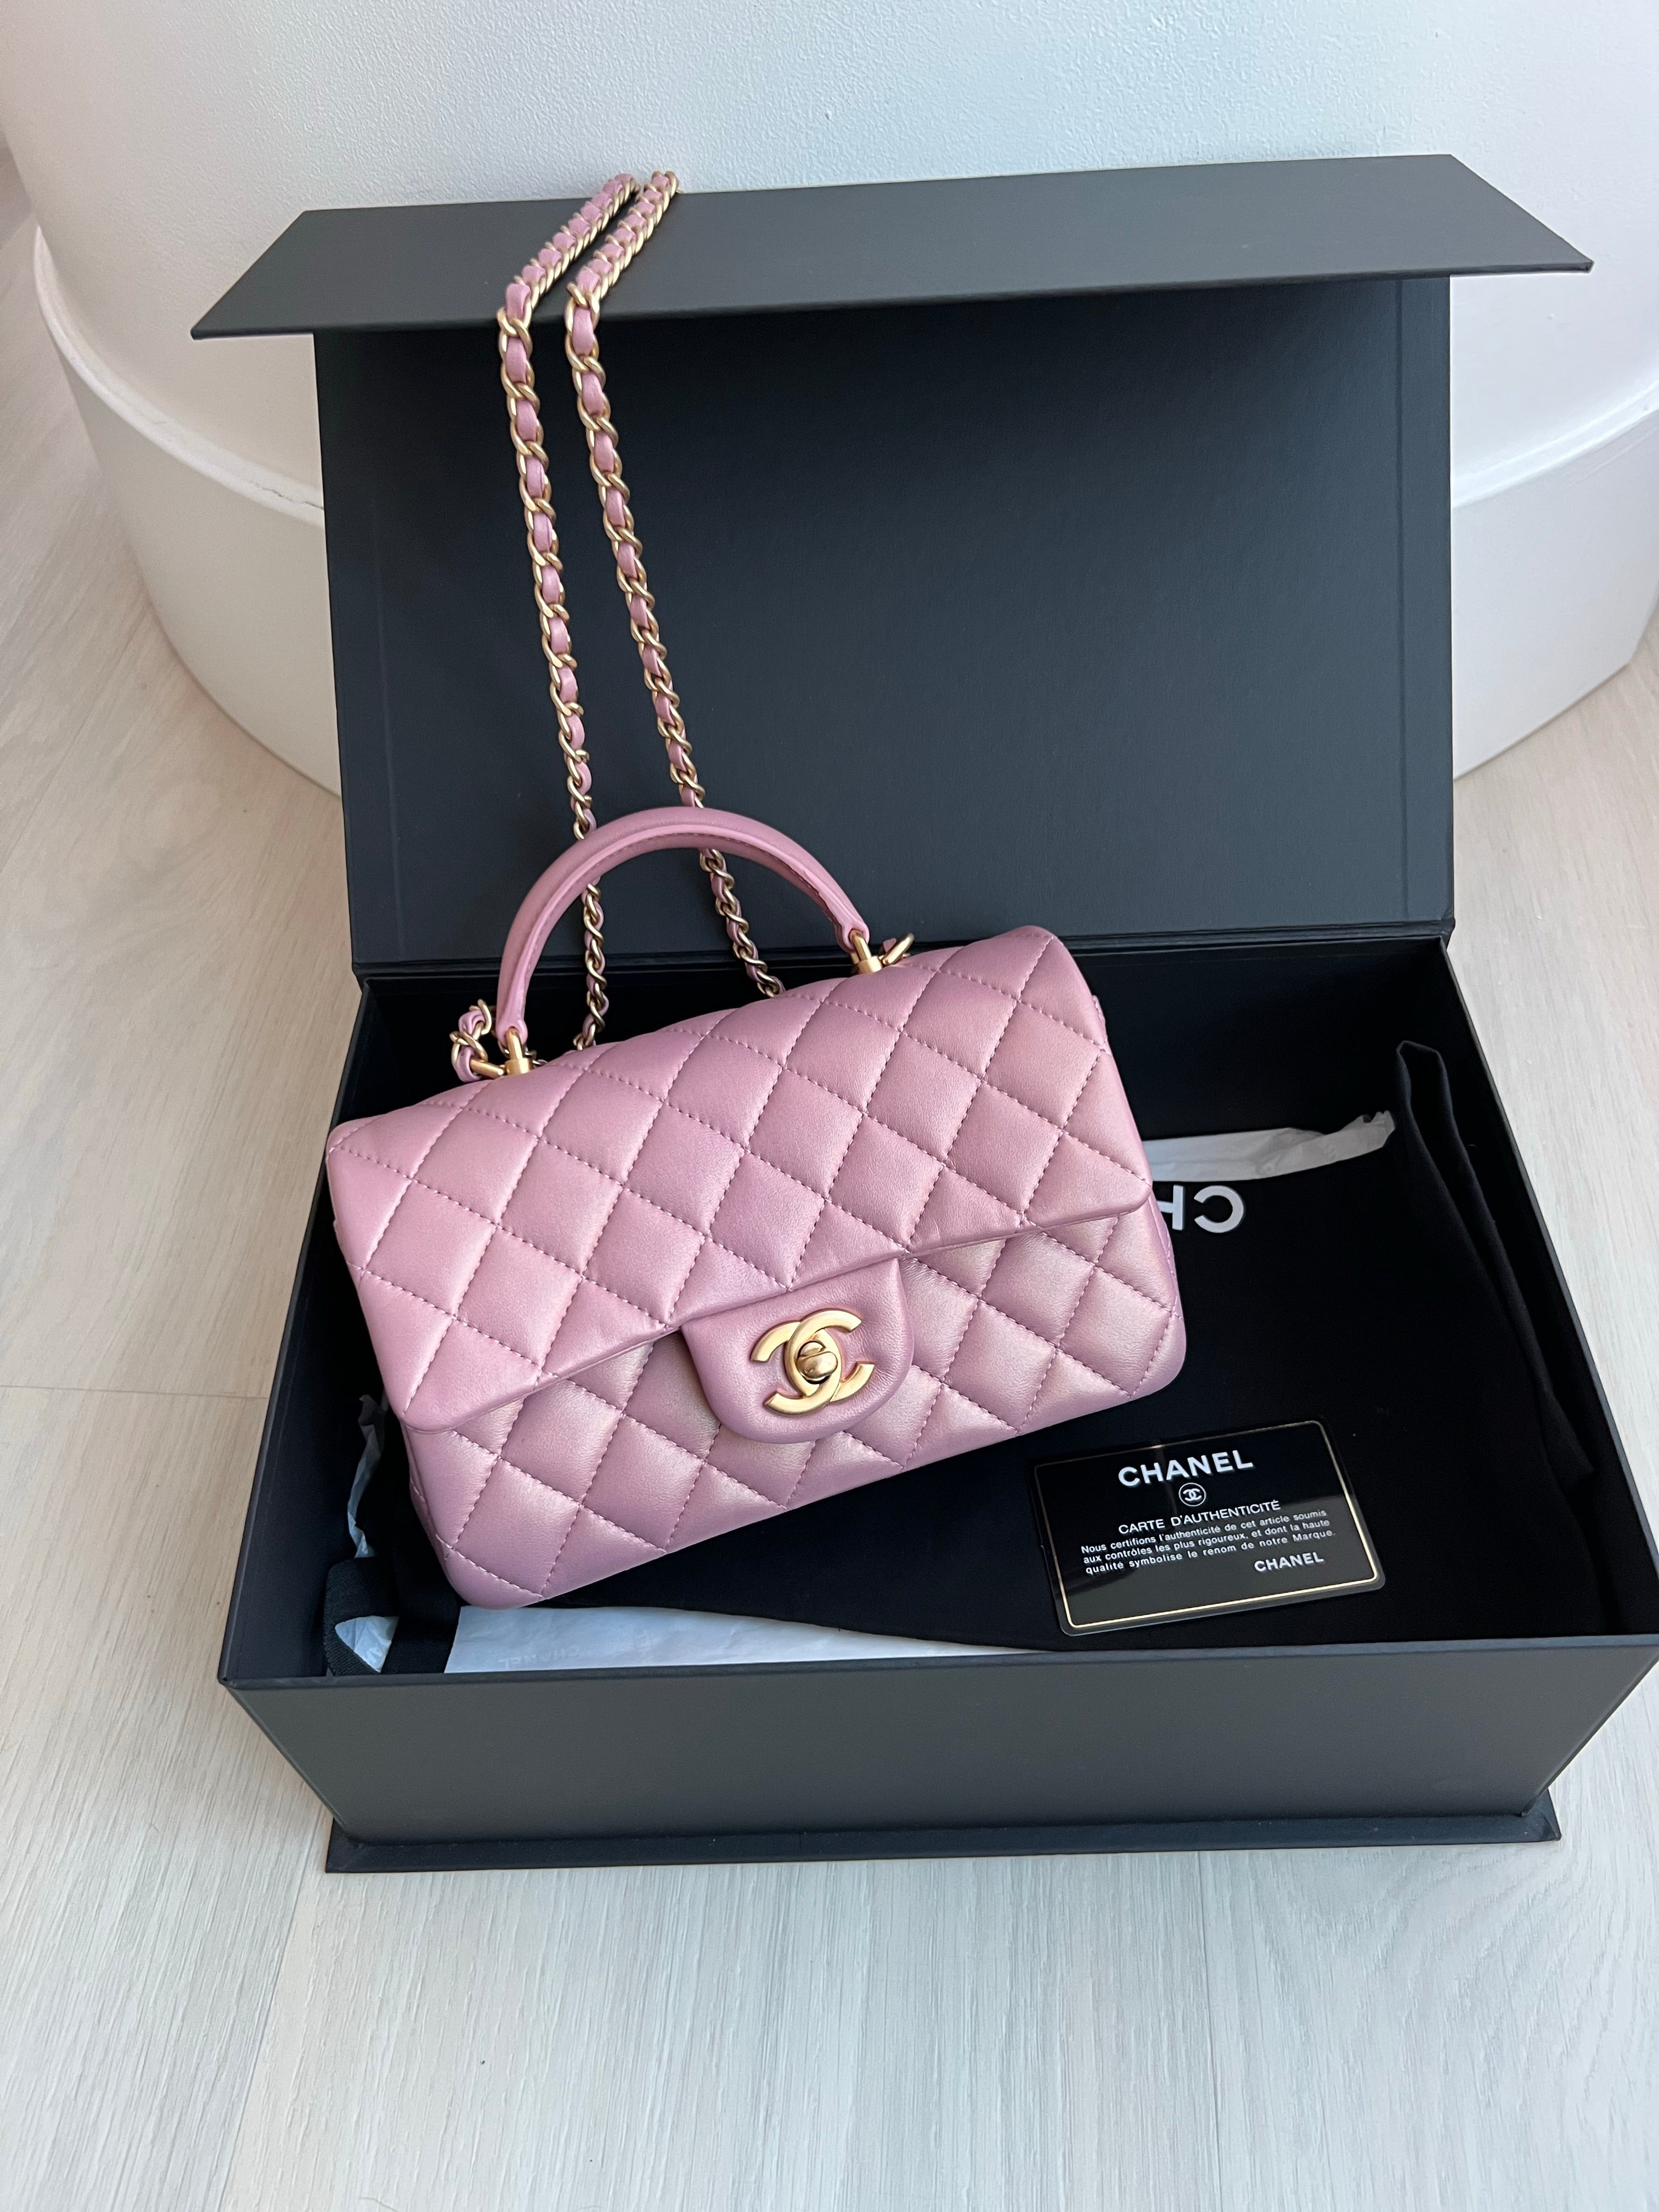 Chanel Quilted Pink Flap Bag with Handle and Chain 22C RARE  Good  Condition  eBay